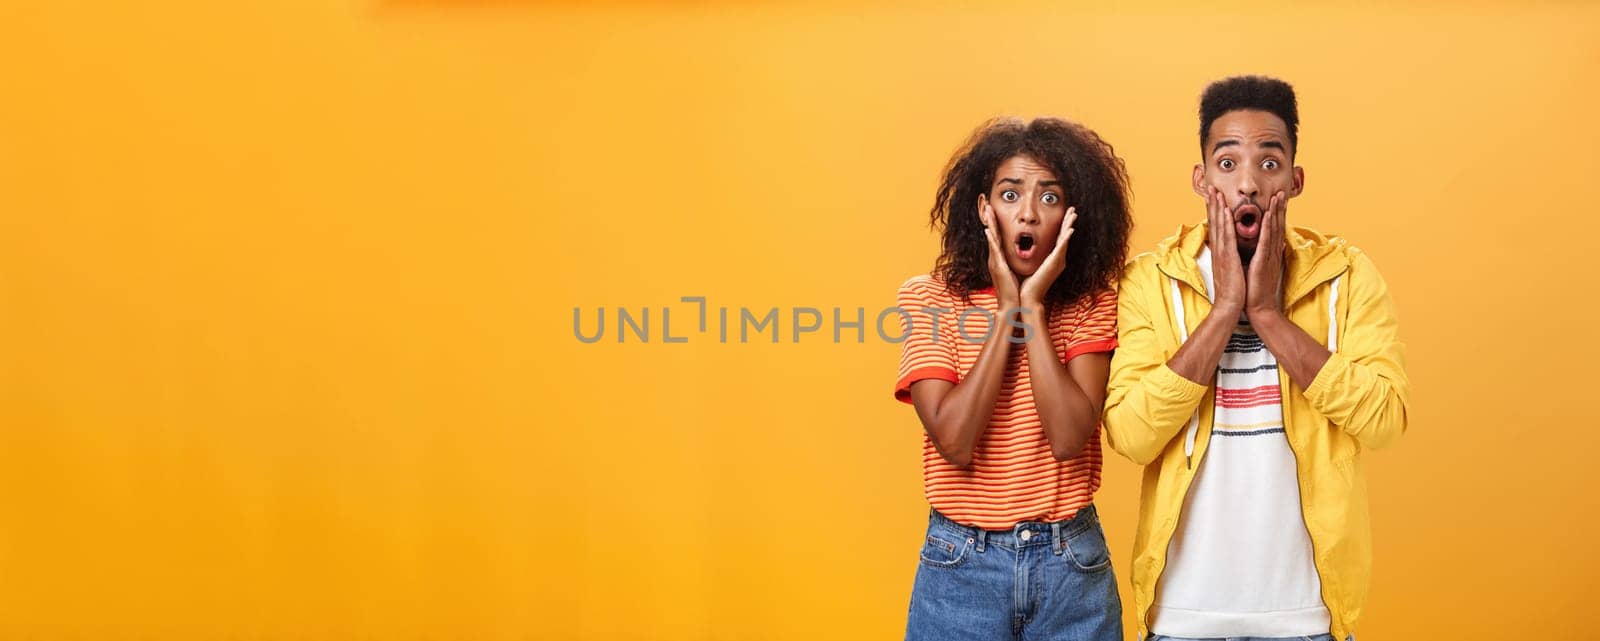 Portrait of shocked and stunned speechless girlfriend dropping jaw from amazement with boyfriend feeling amazed from shook news posing together surprised and astonished over orange wall. Lifestyle.